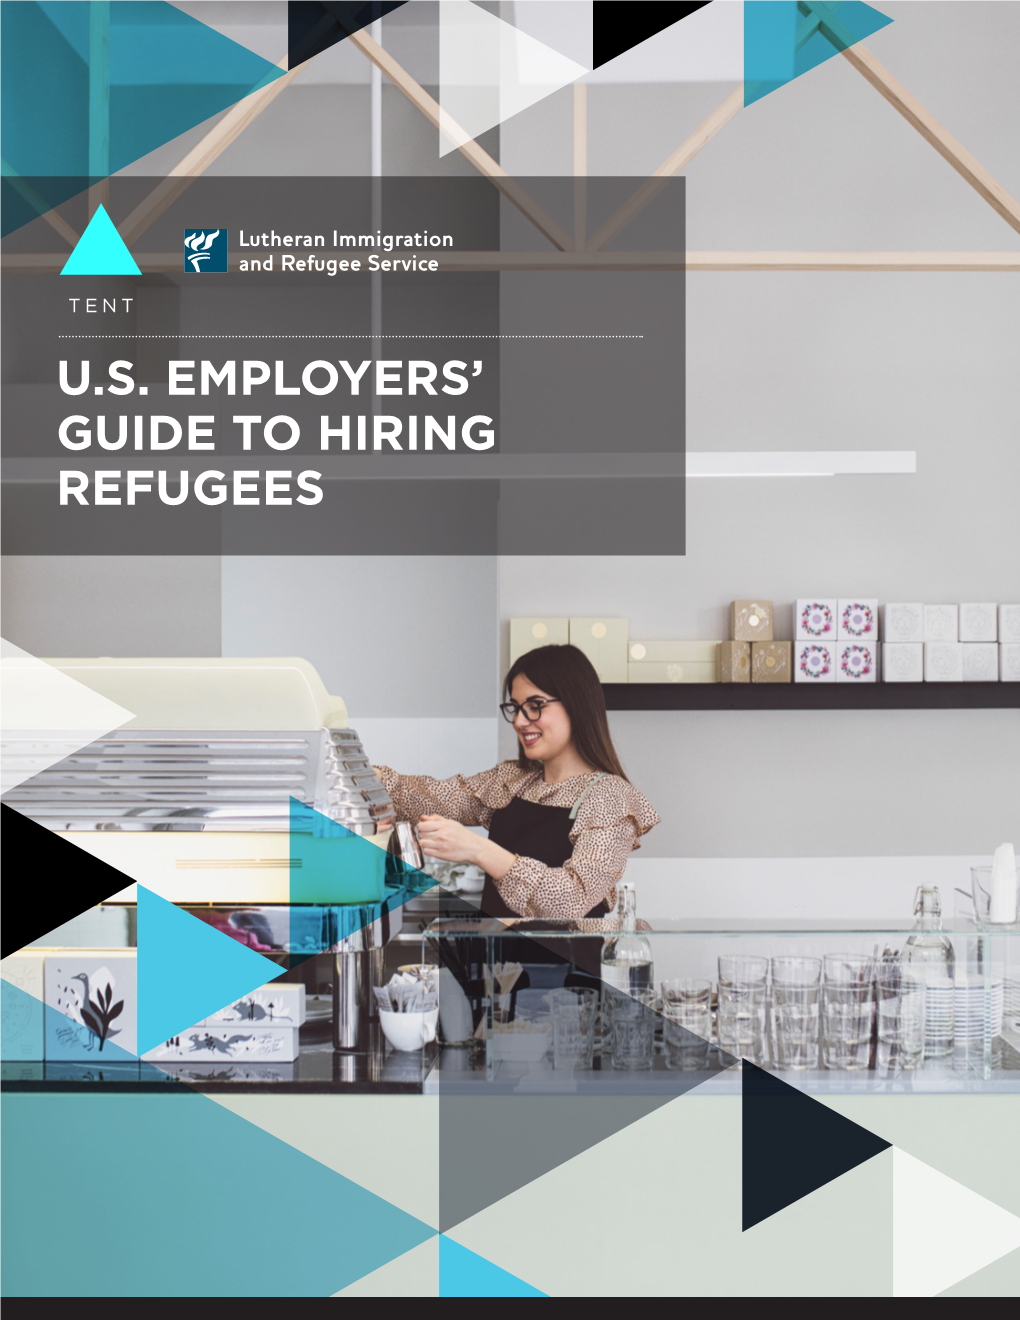 U.S. Employers' Guide to Hiring Refugees